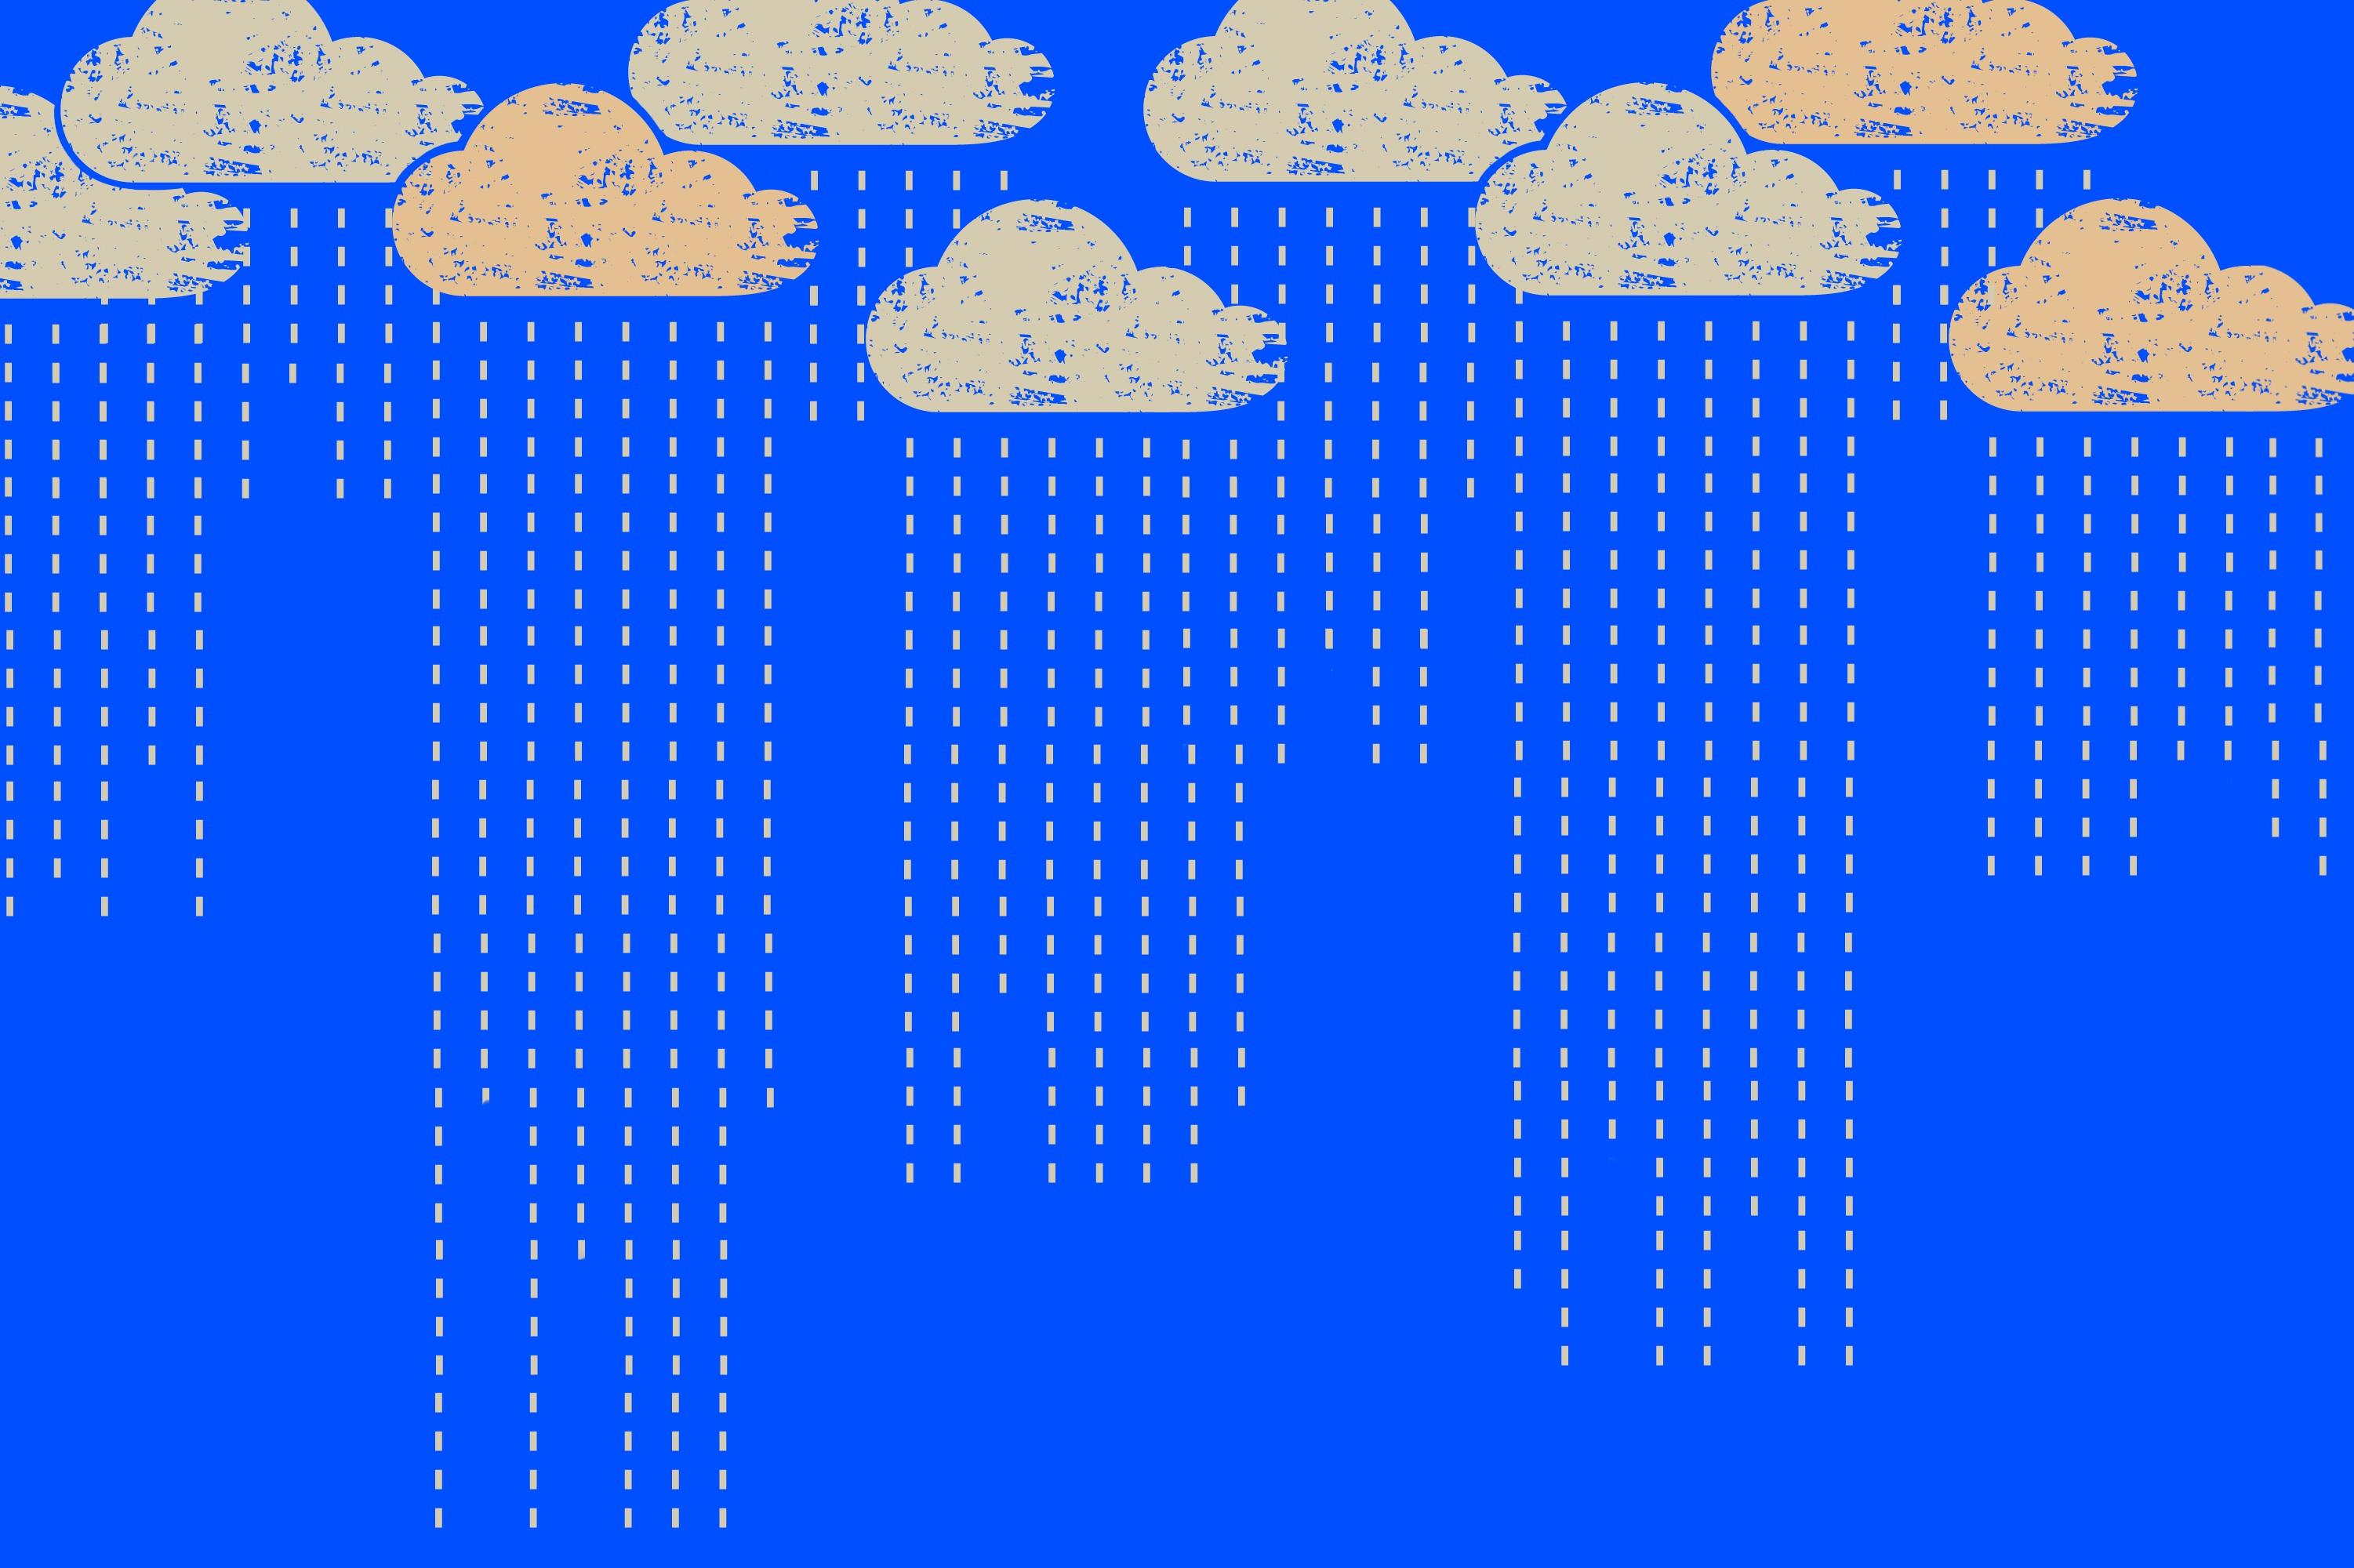 Some graphic clouds raining on a blue background